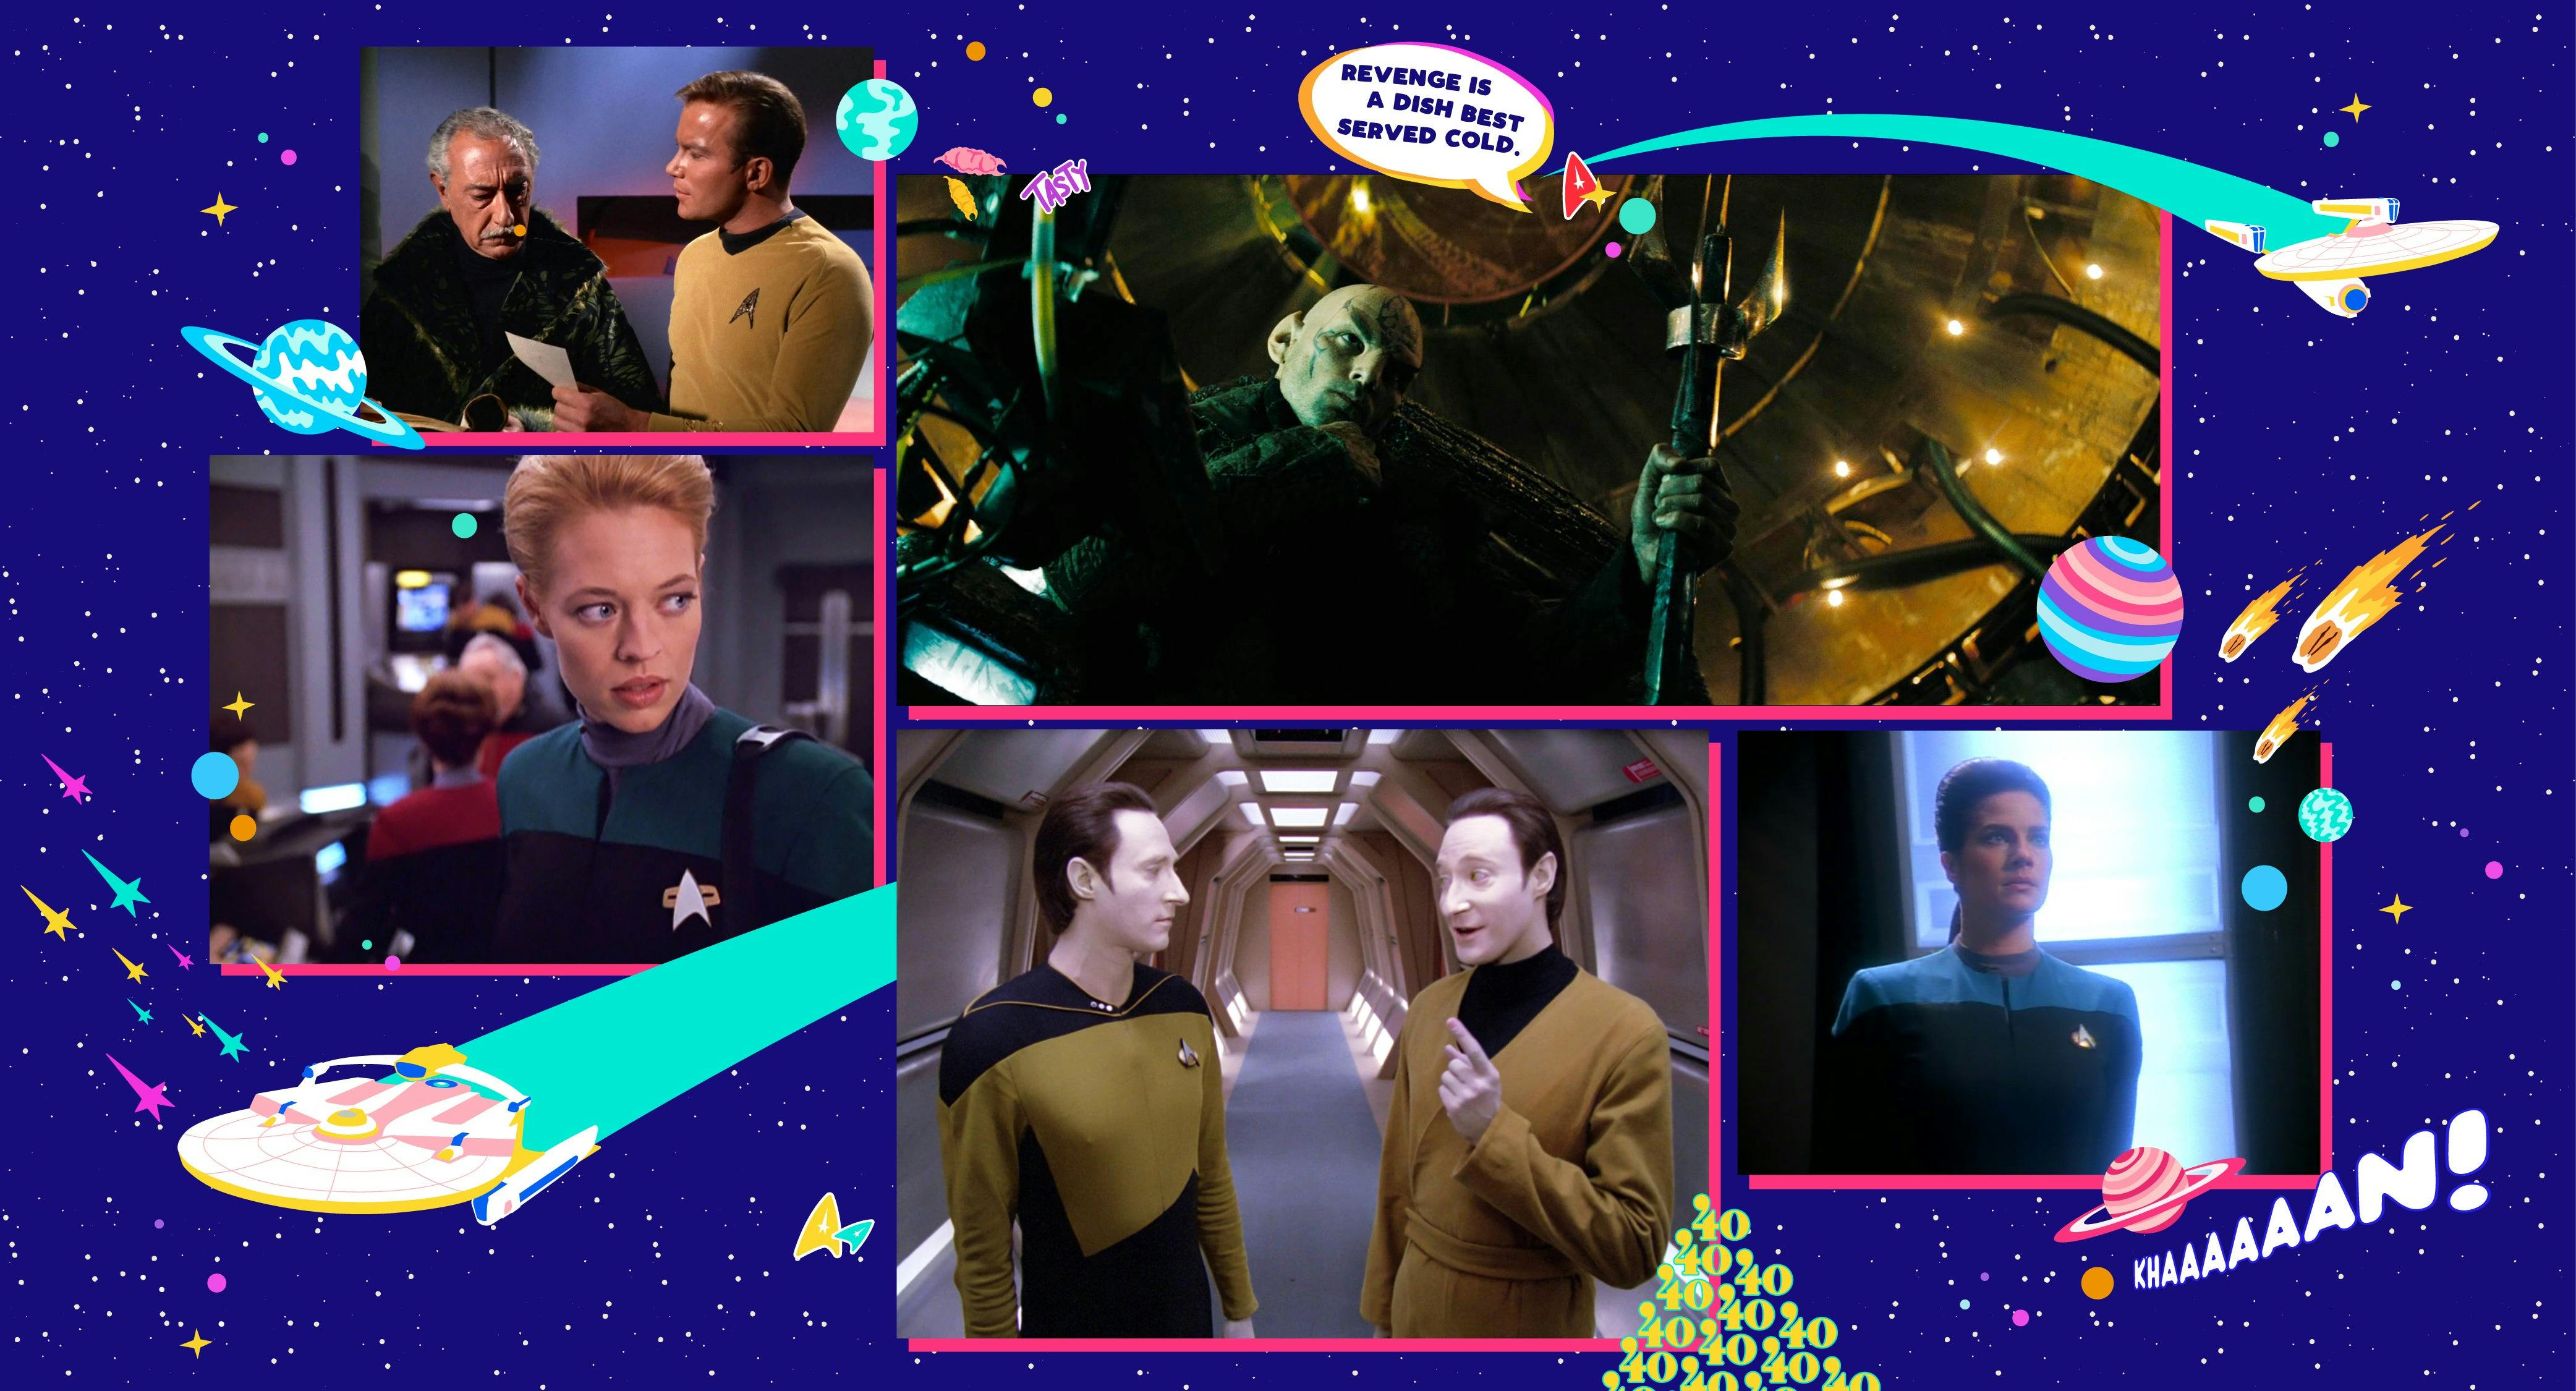 A collage of images featuring Kirk, Seven of Nine, Data, Lore, Jadzia Dax, and Nero is set against a purple background.